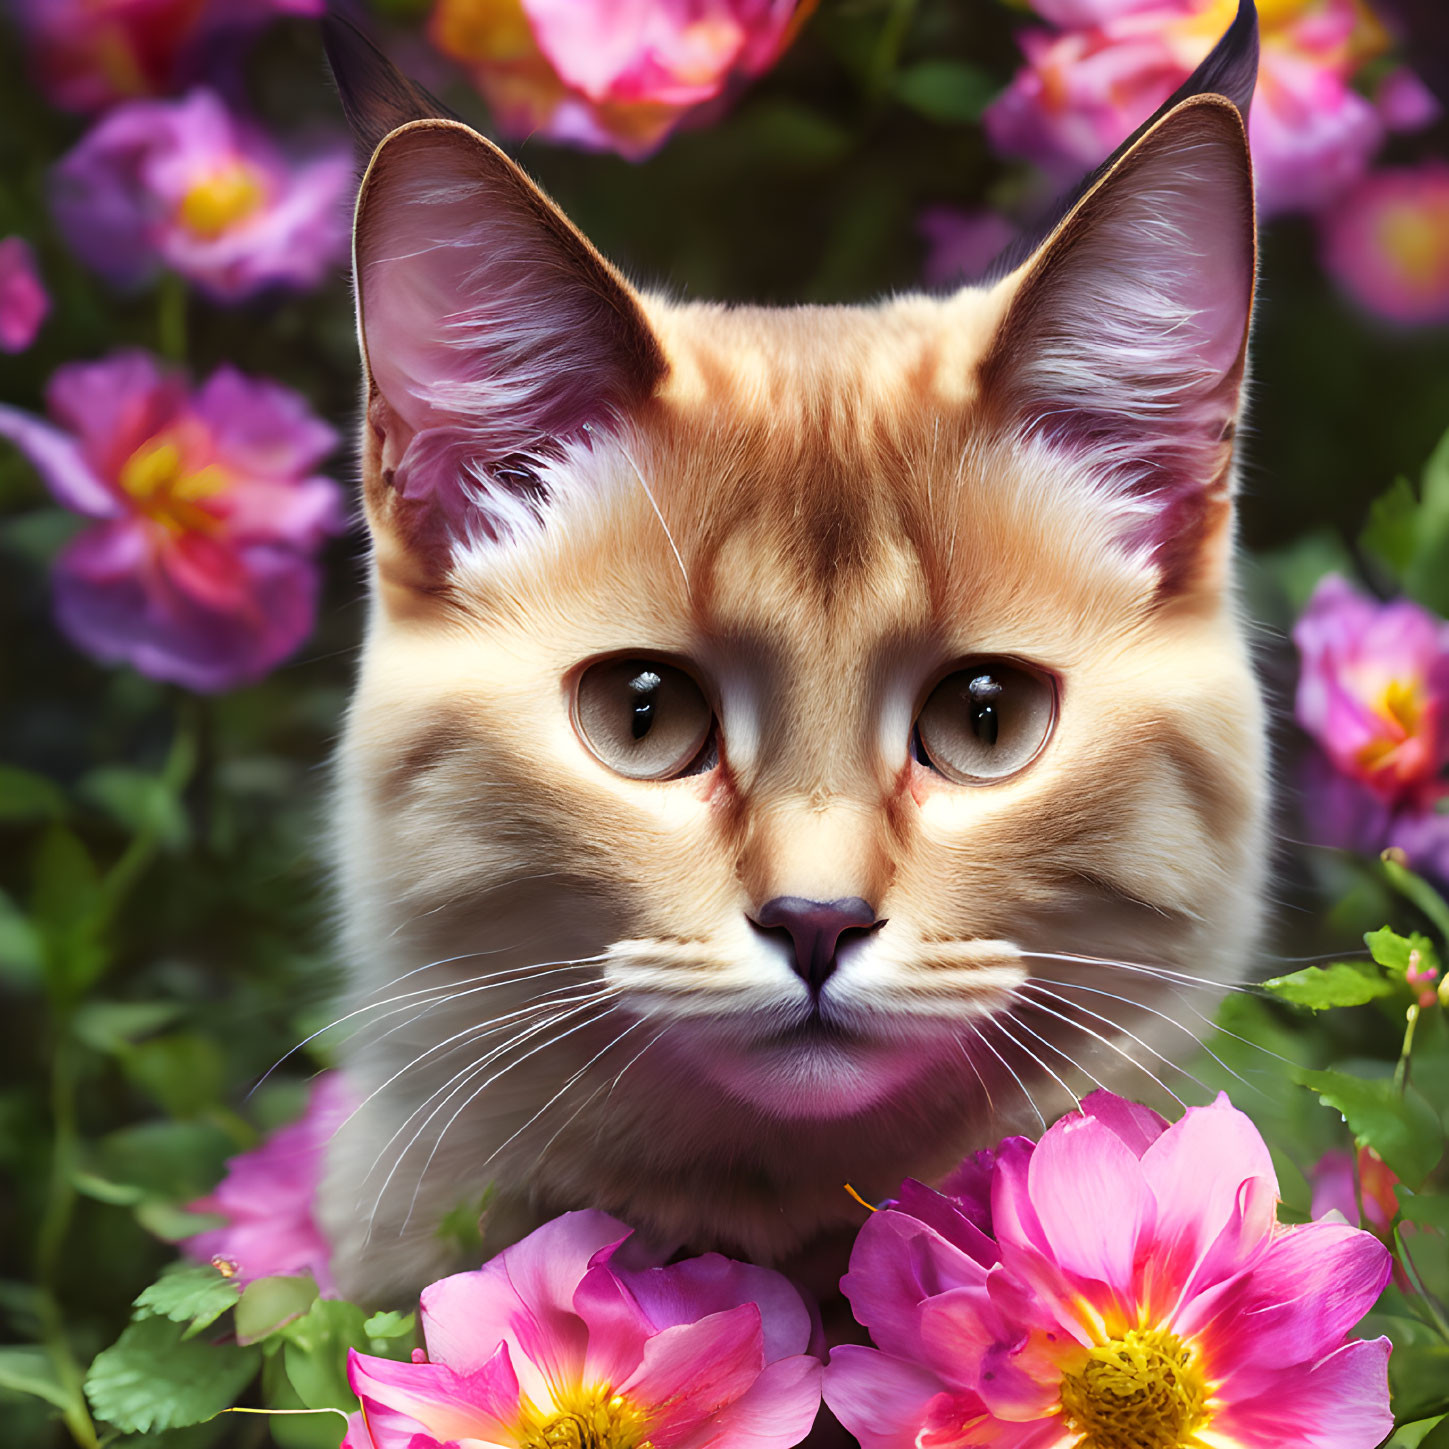 Orange and White Cat with Striking Eyes Among Vibrant Pink Flowers